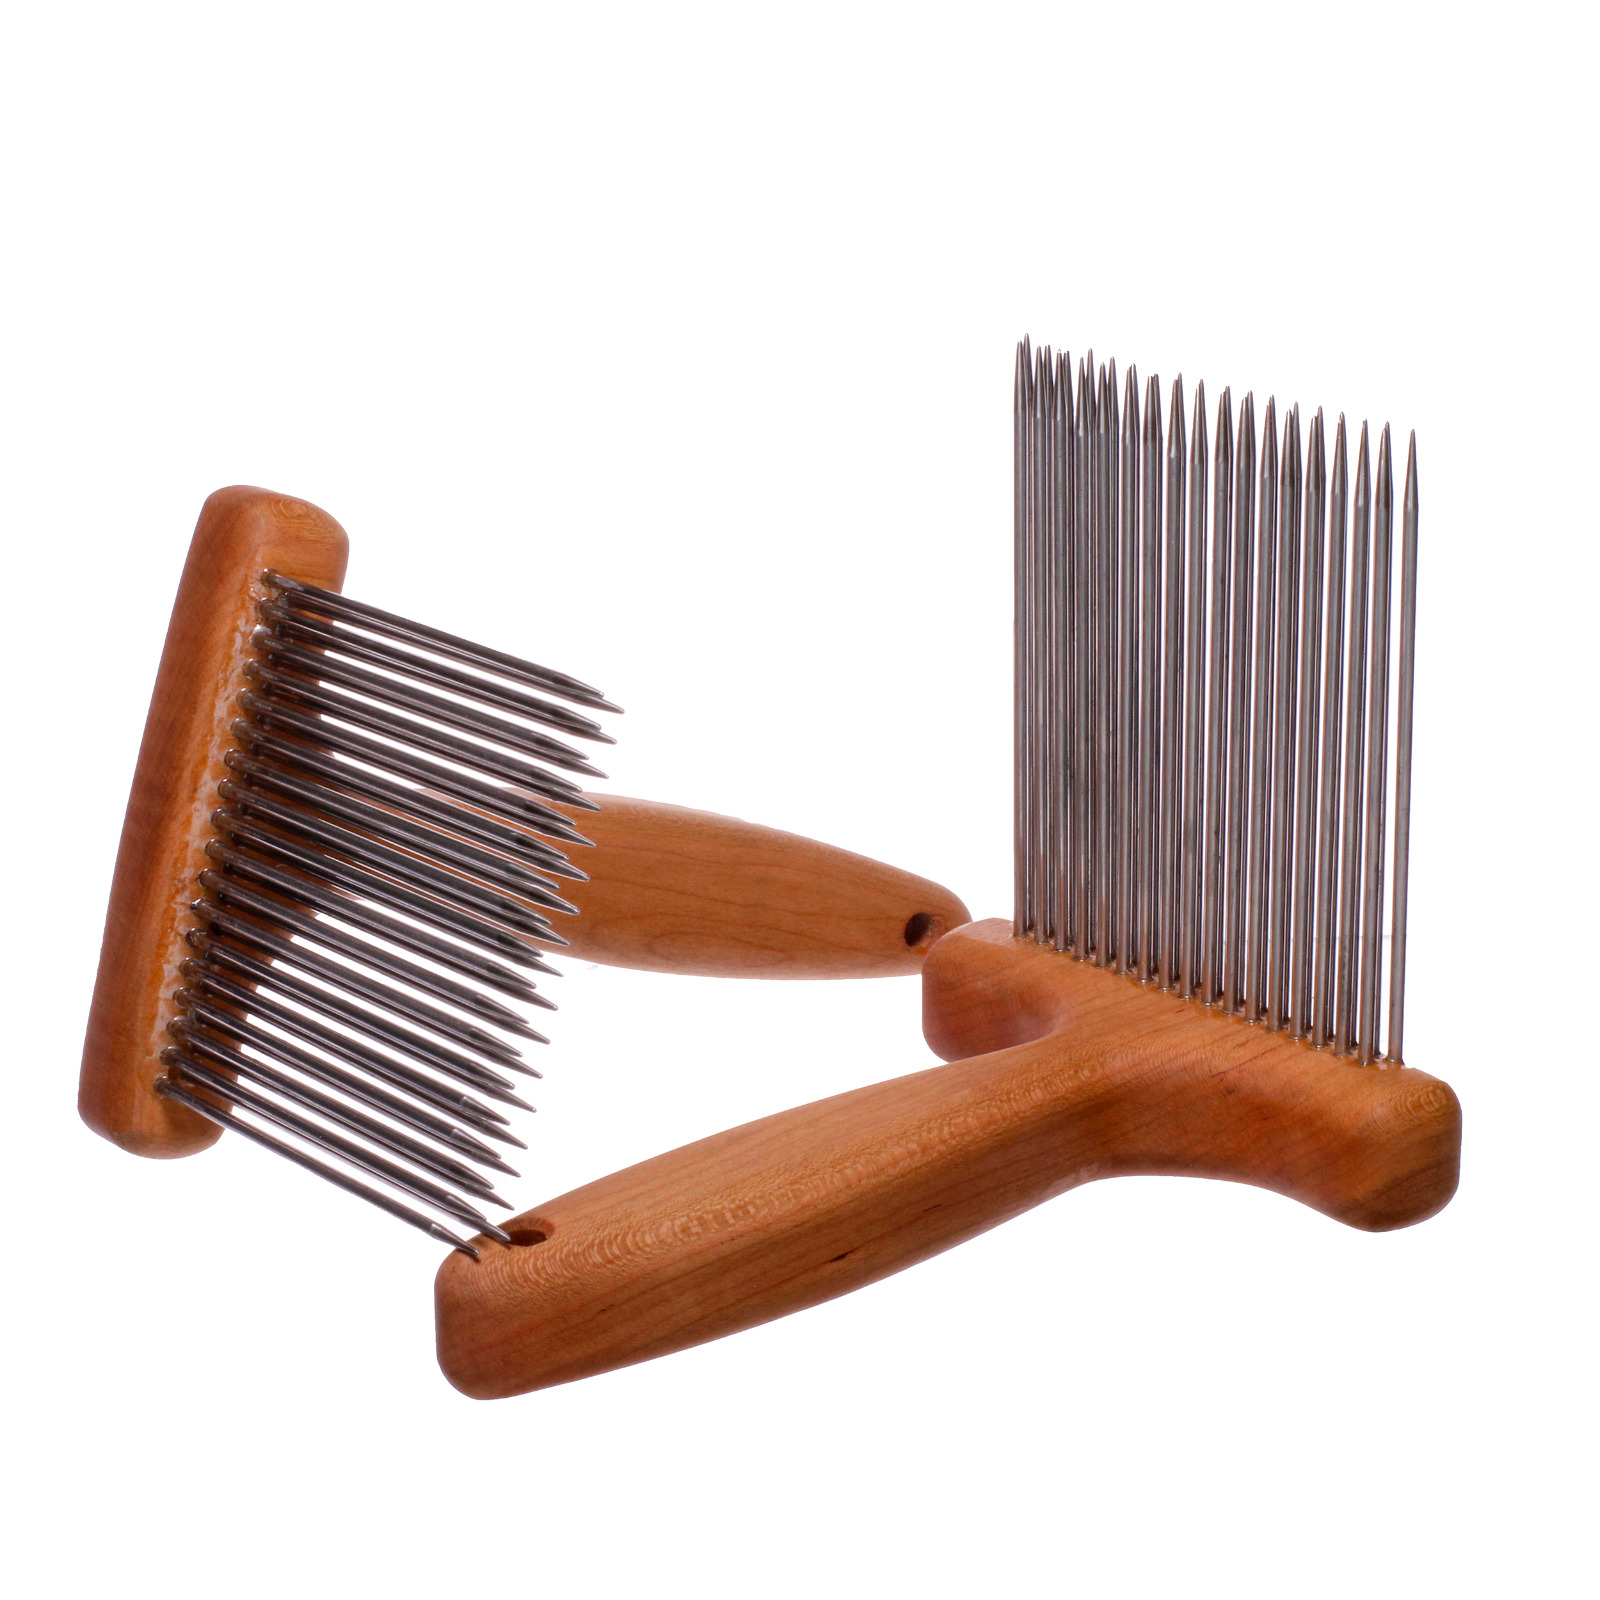 Extra Fine Wool Combs - Smooth Points - Stainless Steel Tines - Cherry Wood